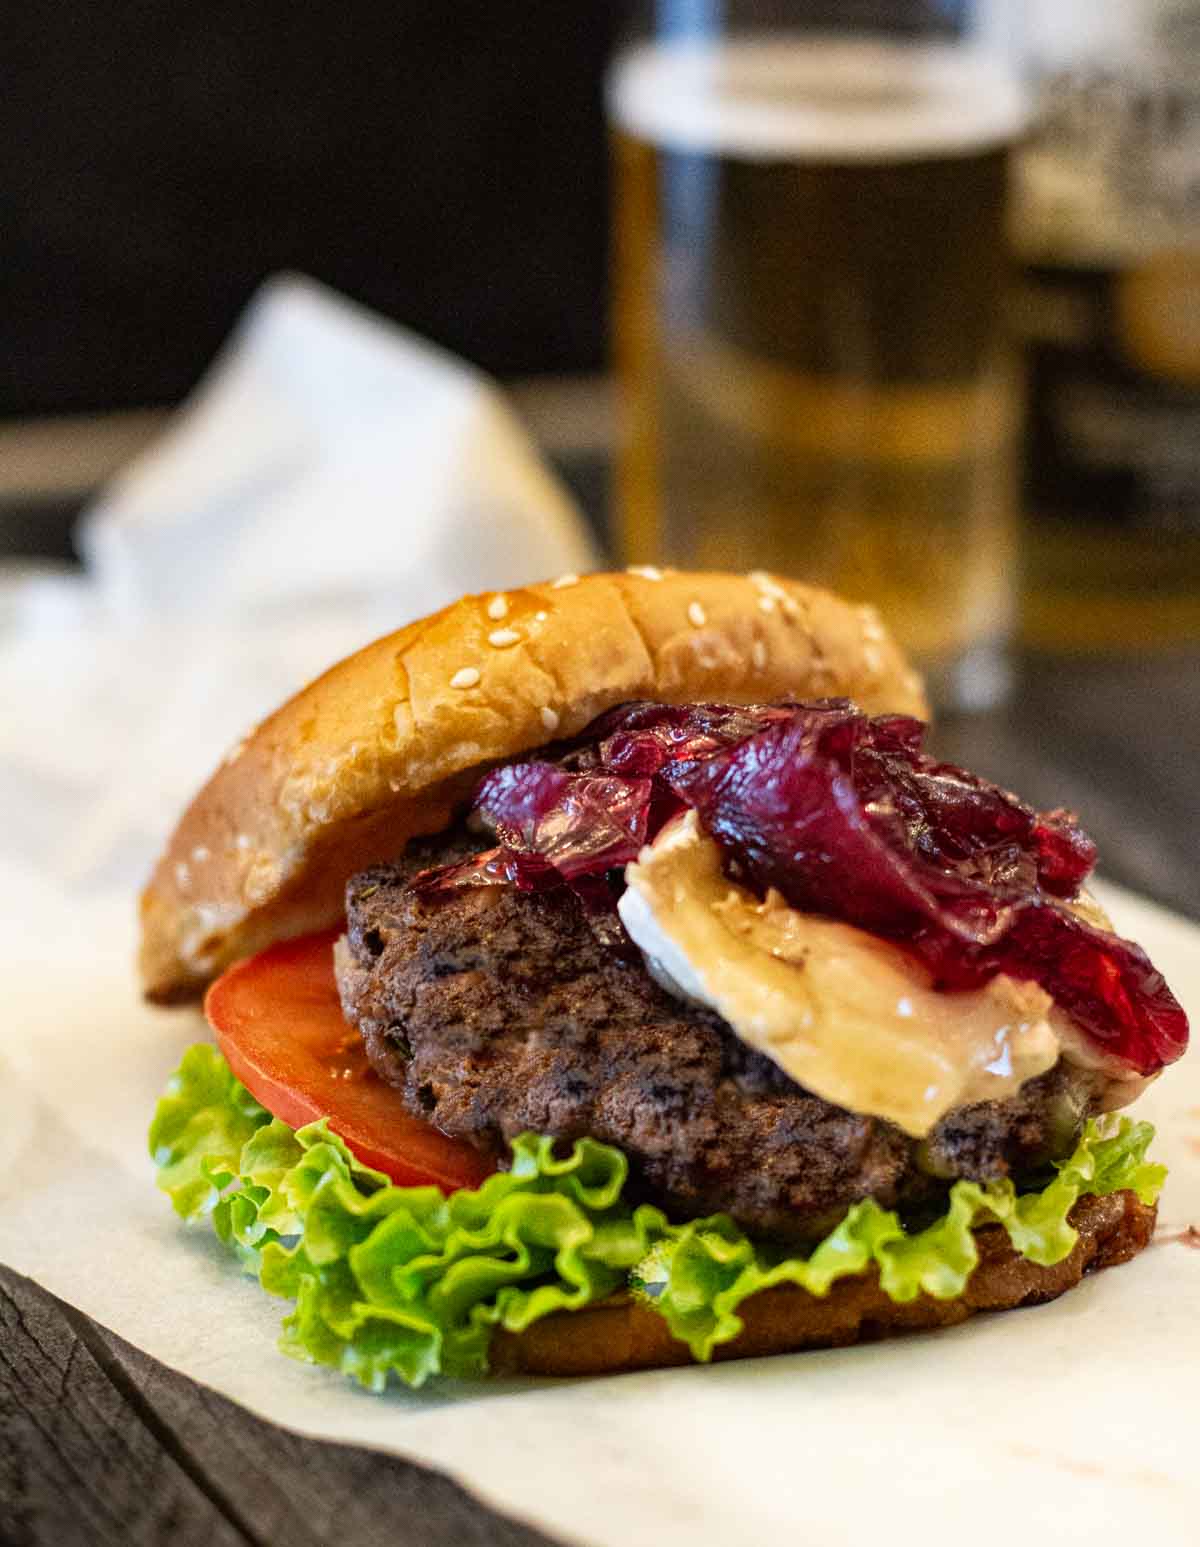 Brie Burgers with lettuce and tomato topped with red onion marmalade.